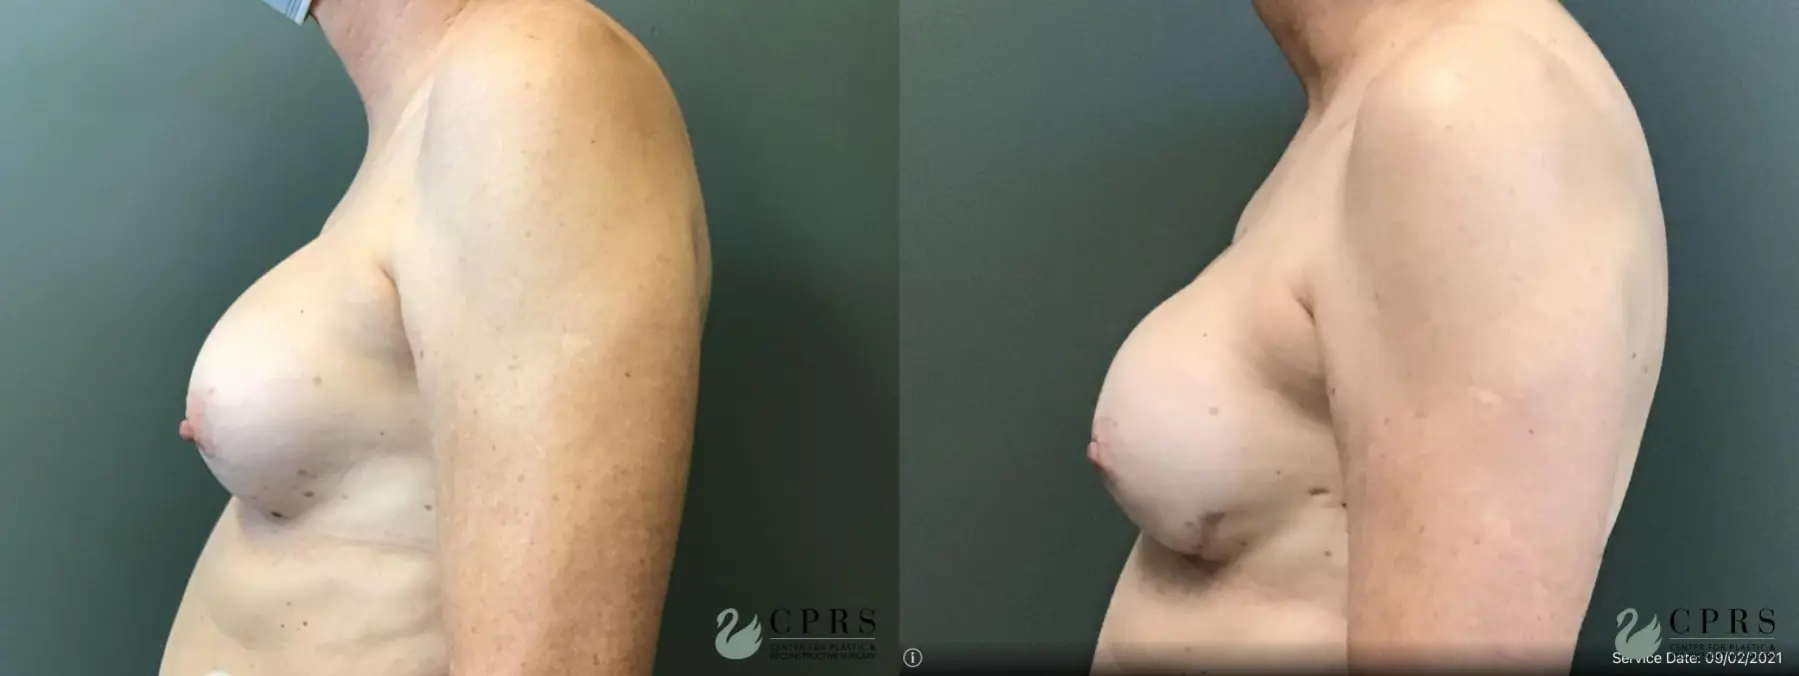 Breast Reconstruction: Patient 7 - Before and After 2